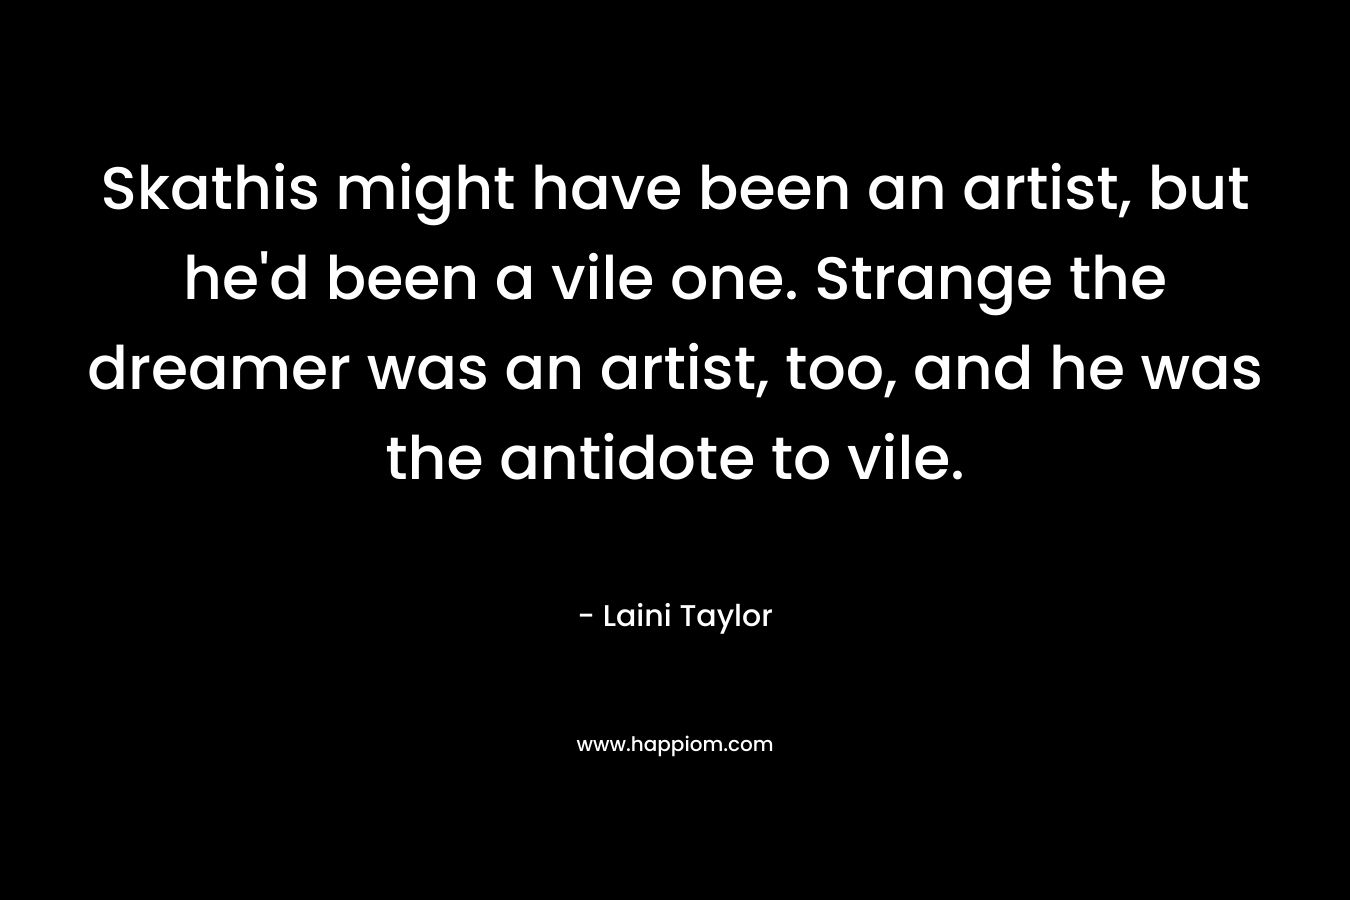 Skathis might have been an artist, but he’d been a vile one. Strange the dreamer was an artist, too, and he was the antidote to vile. – Laini Taylor